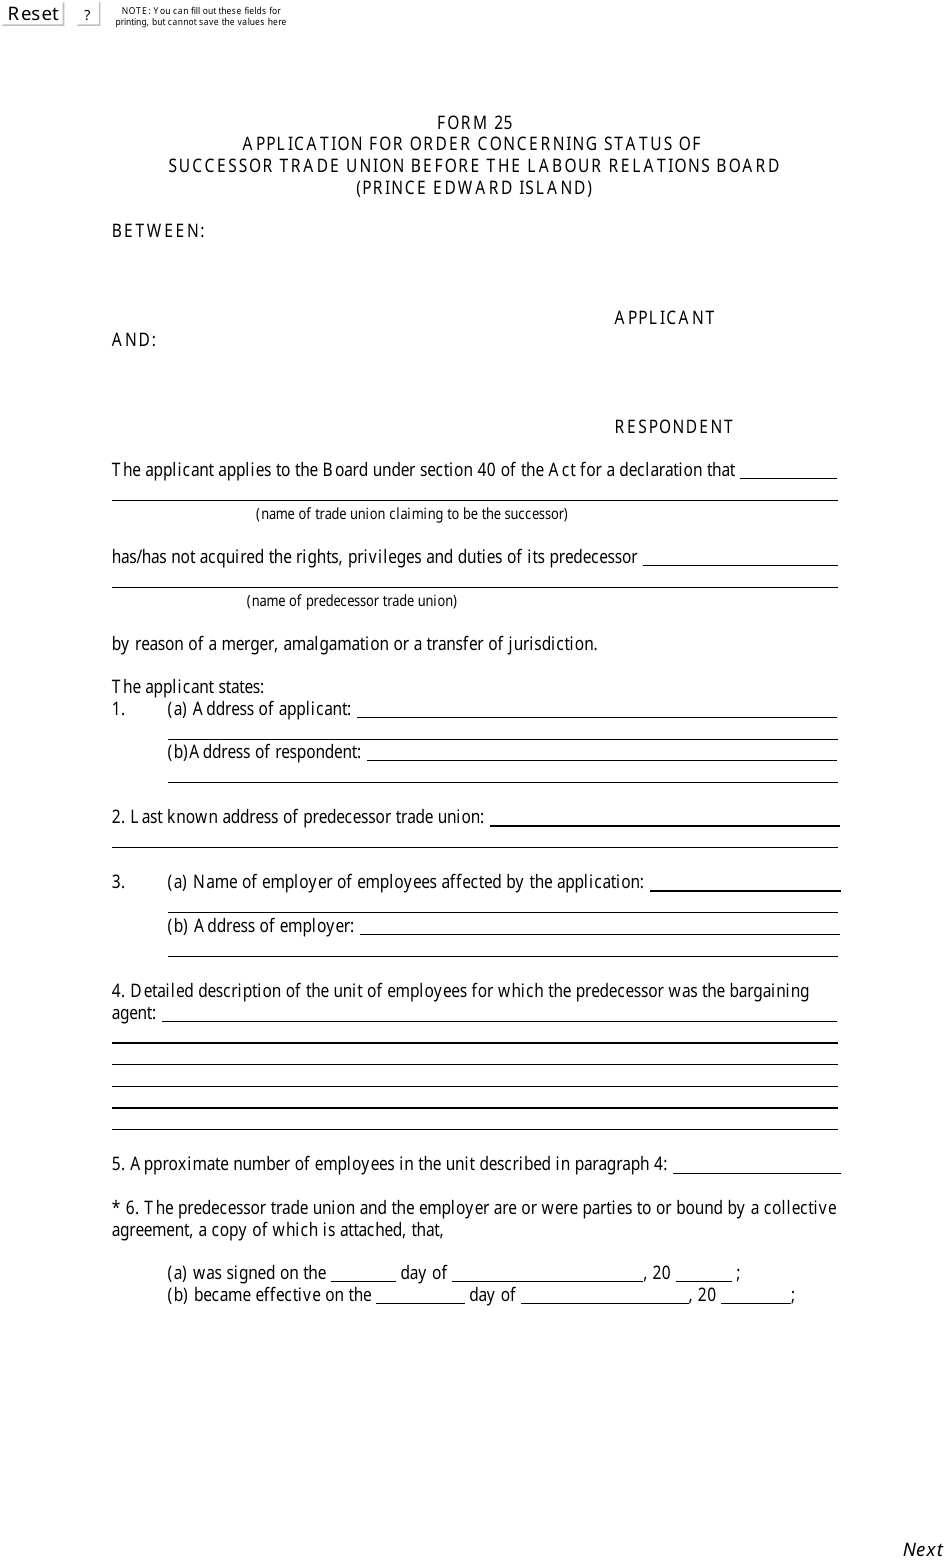 Form 25 Application for Order Concerning Status of Successor Trade Union Before the Labour Relations Board (Prince Edward Island) - Prince Edward Island, Canada, Page 1